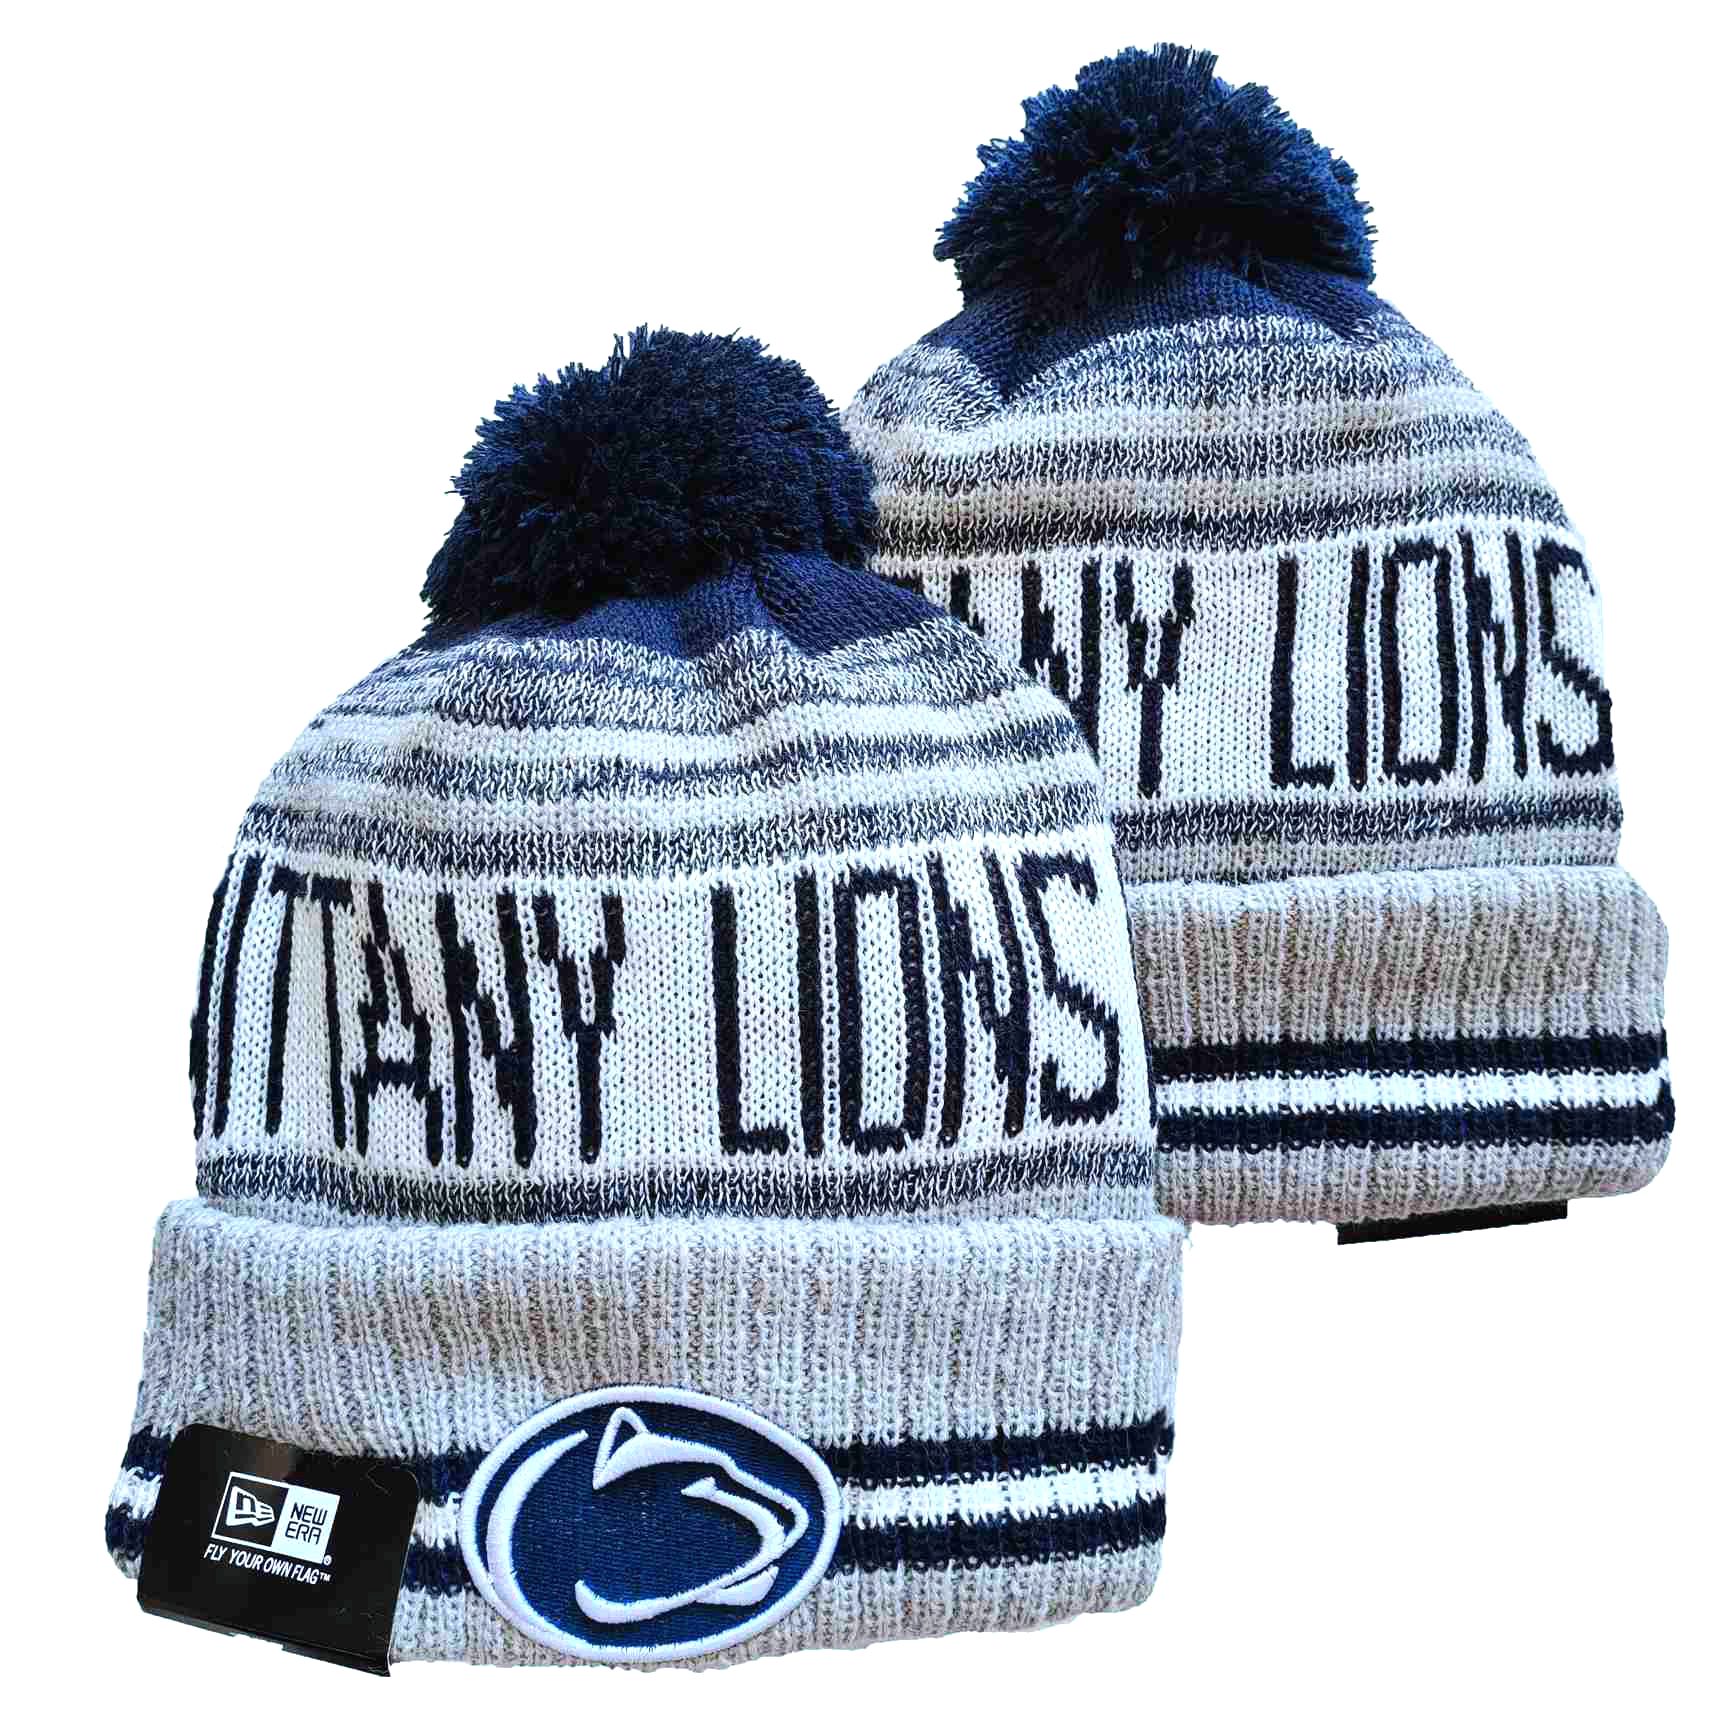 Penn State Nittany Lions Knit Hats 002